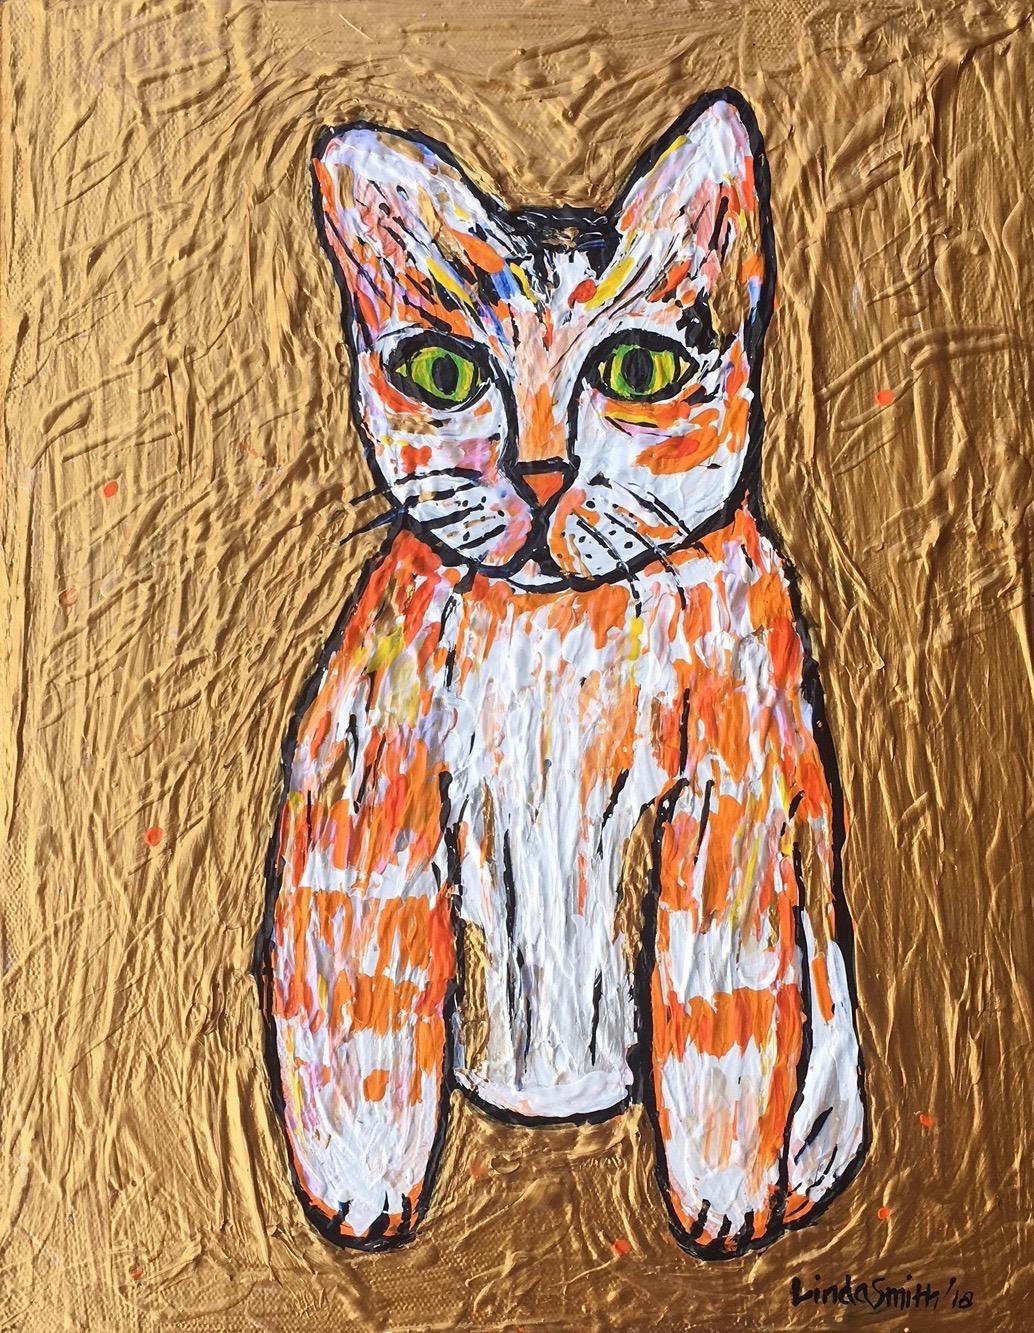 Cat Gold - Painting by Linda H. Smith